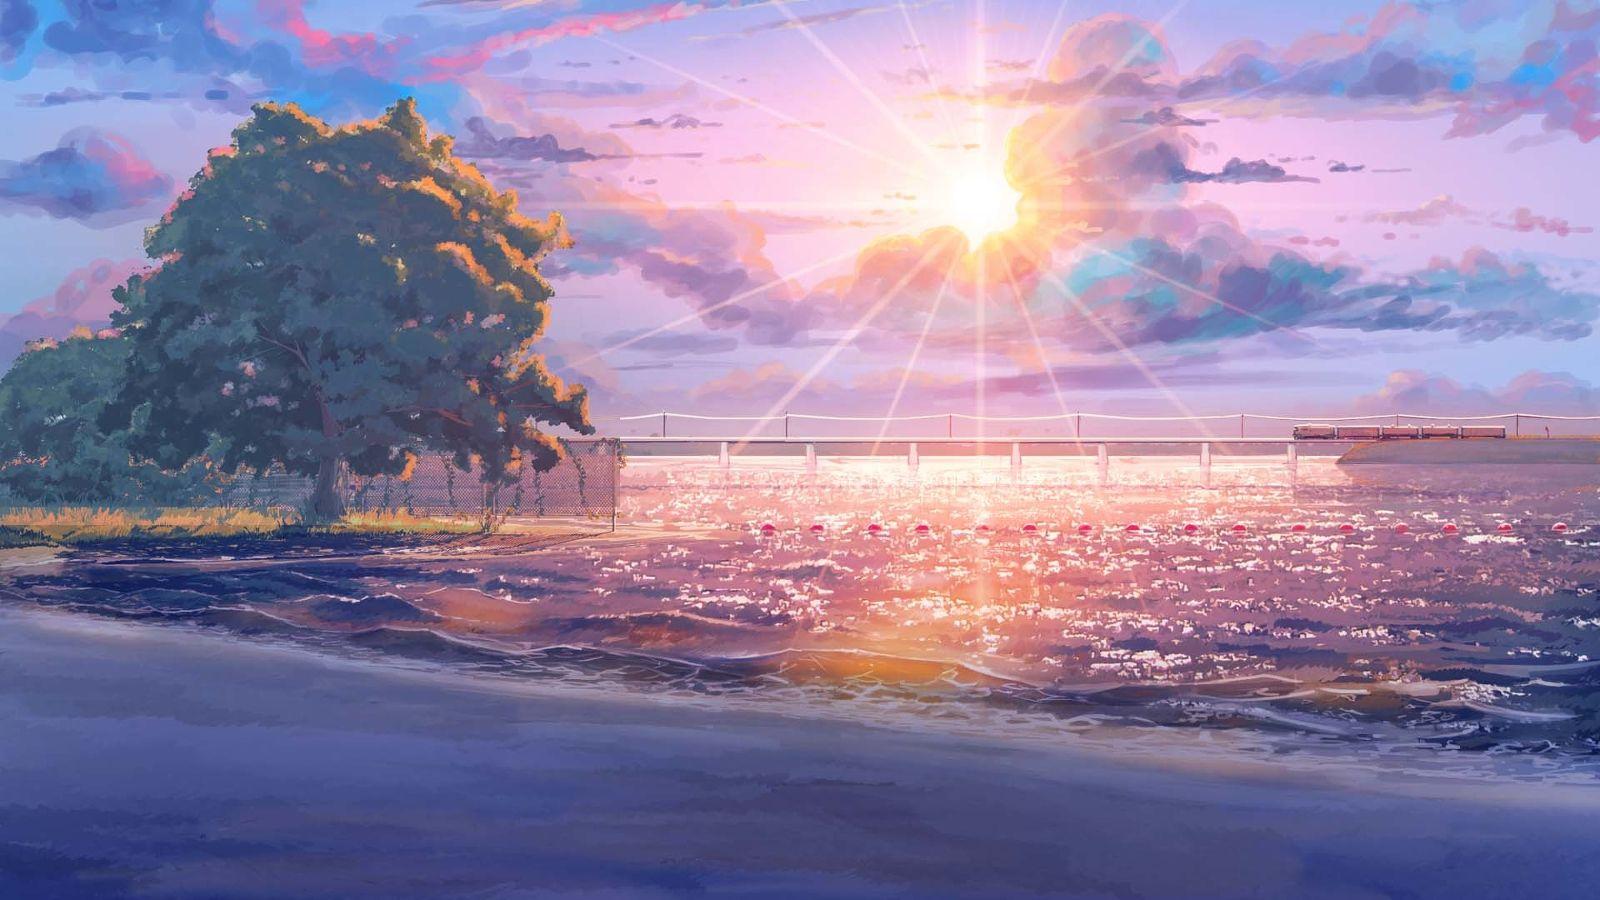 Nature Anime Scenery Background Wallpaper. Resources